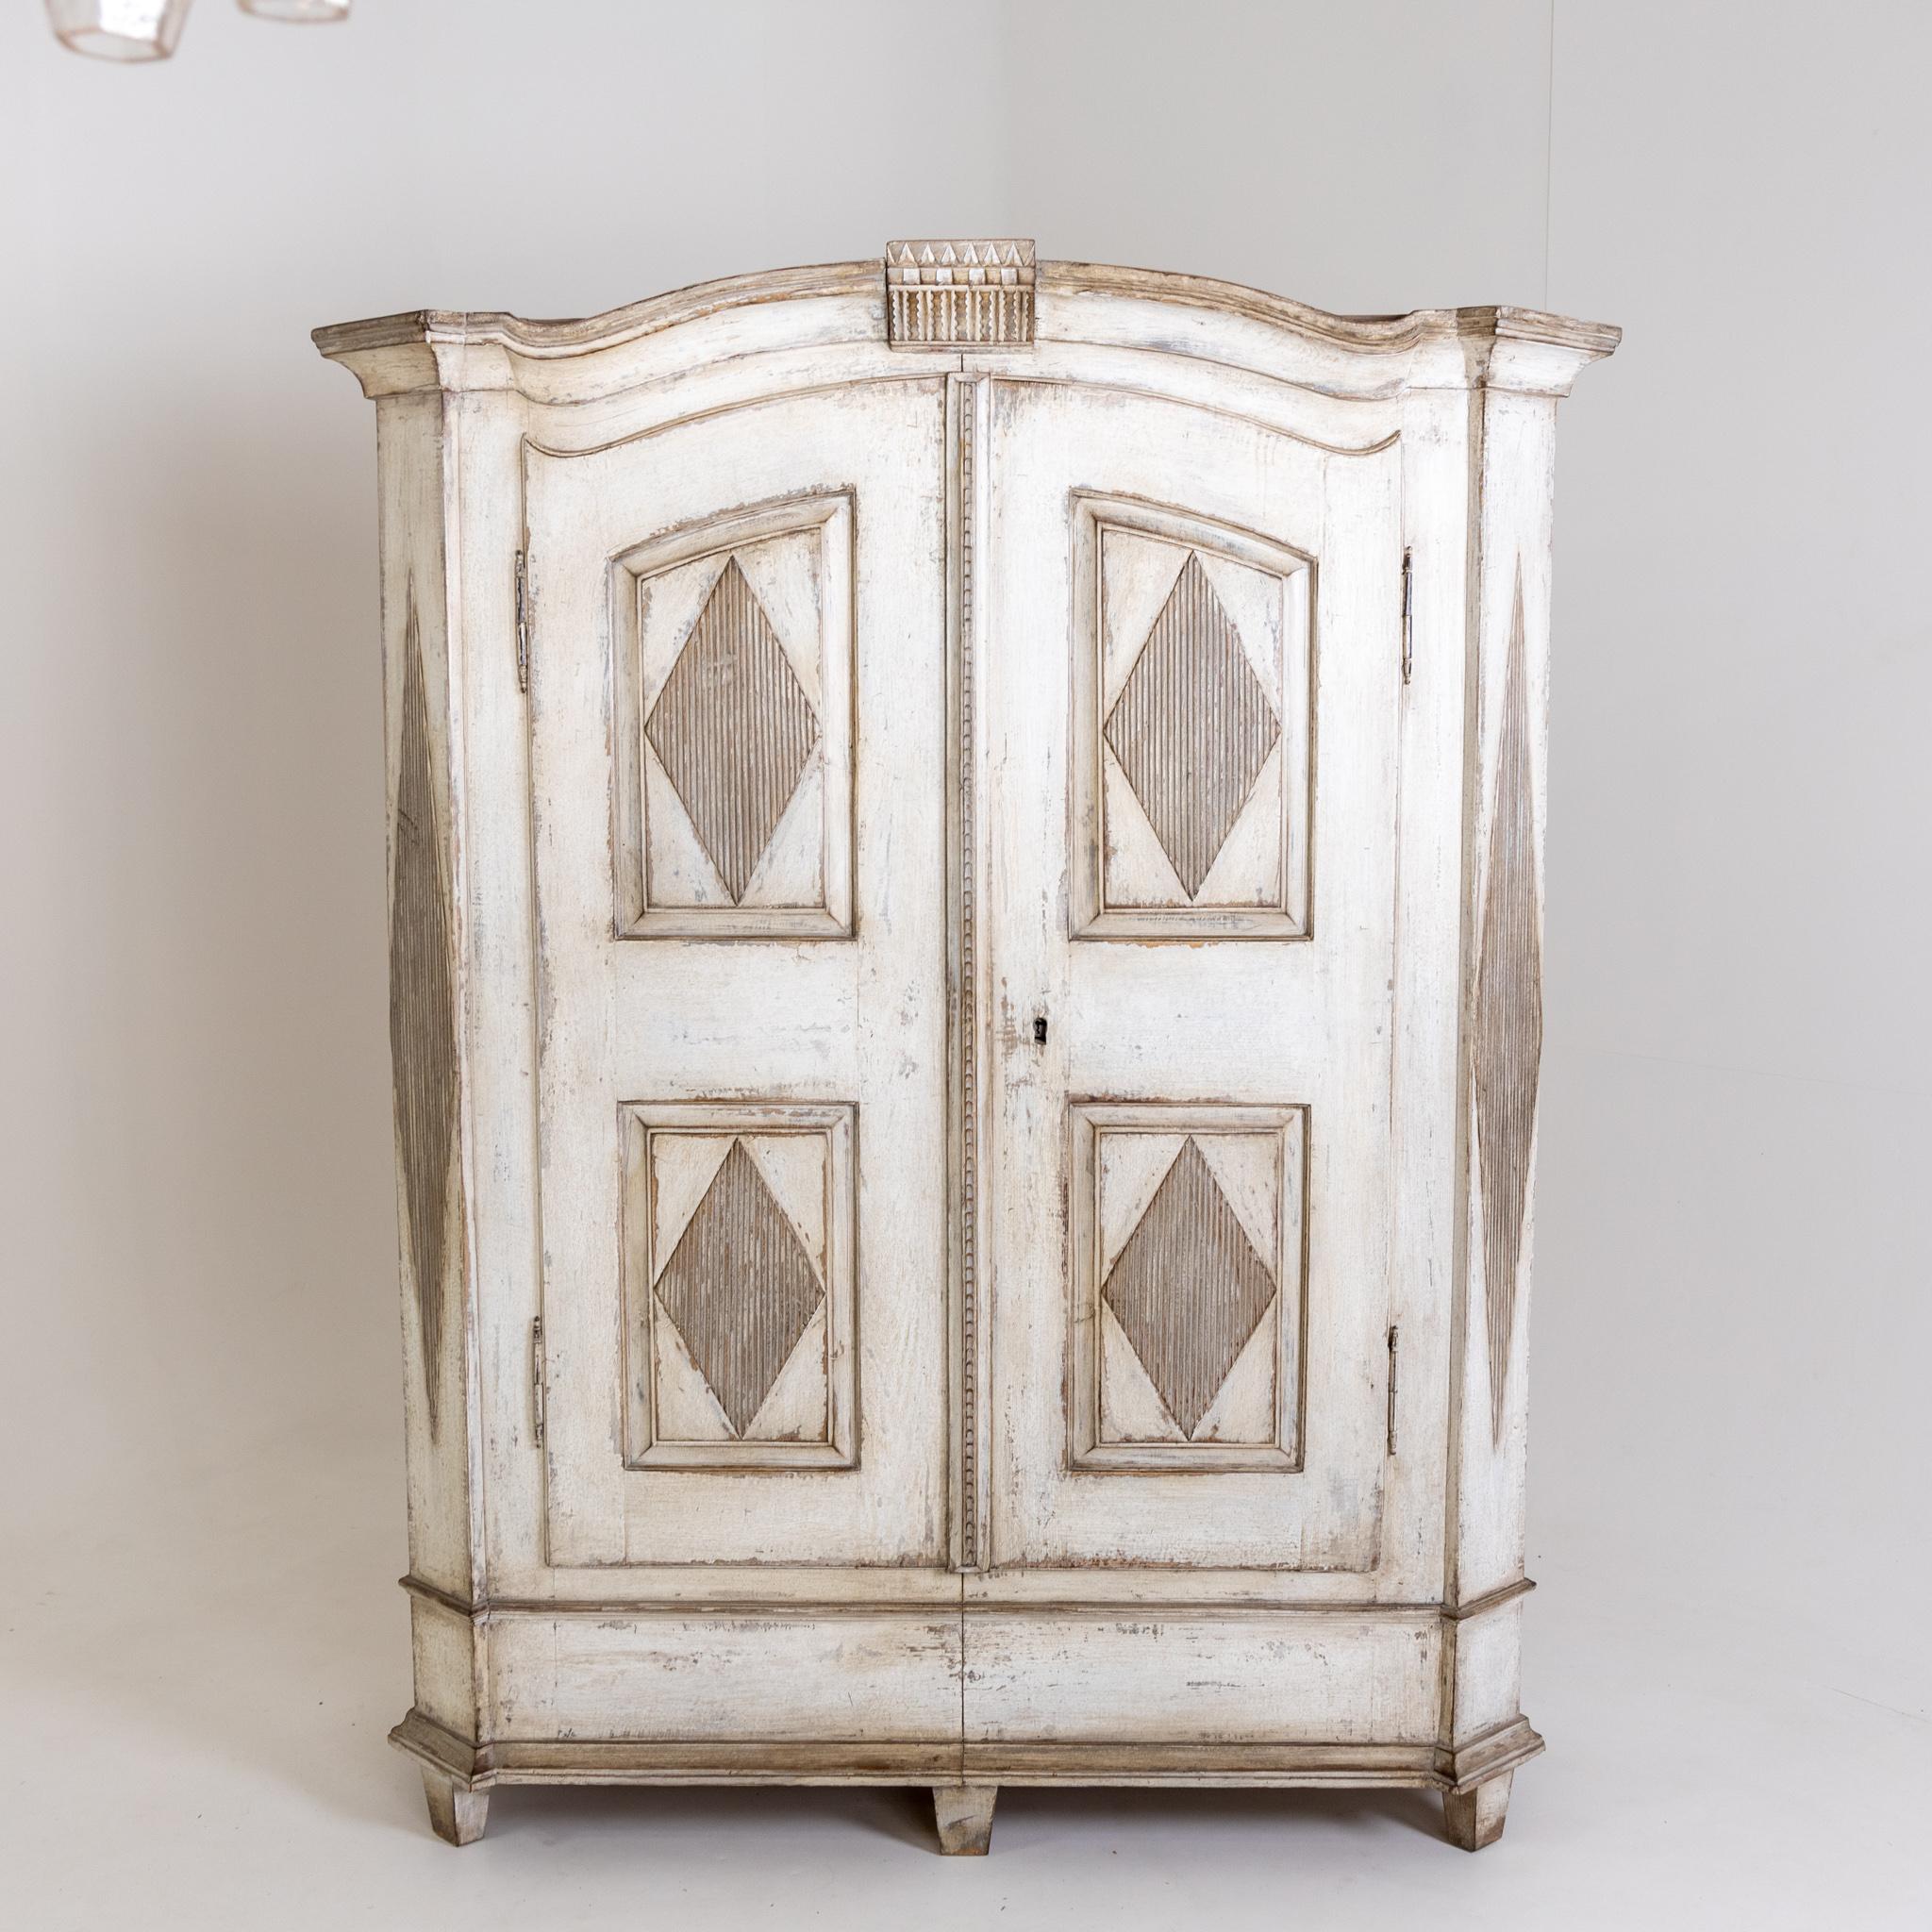 Two-door cabinet with a wide plinth zone and curved cornice. The corpus is decorated with fluted diamond patterns and filling fields on the doors. The creamy white frame is new and has been decoratively patinated.